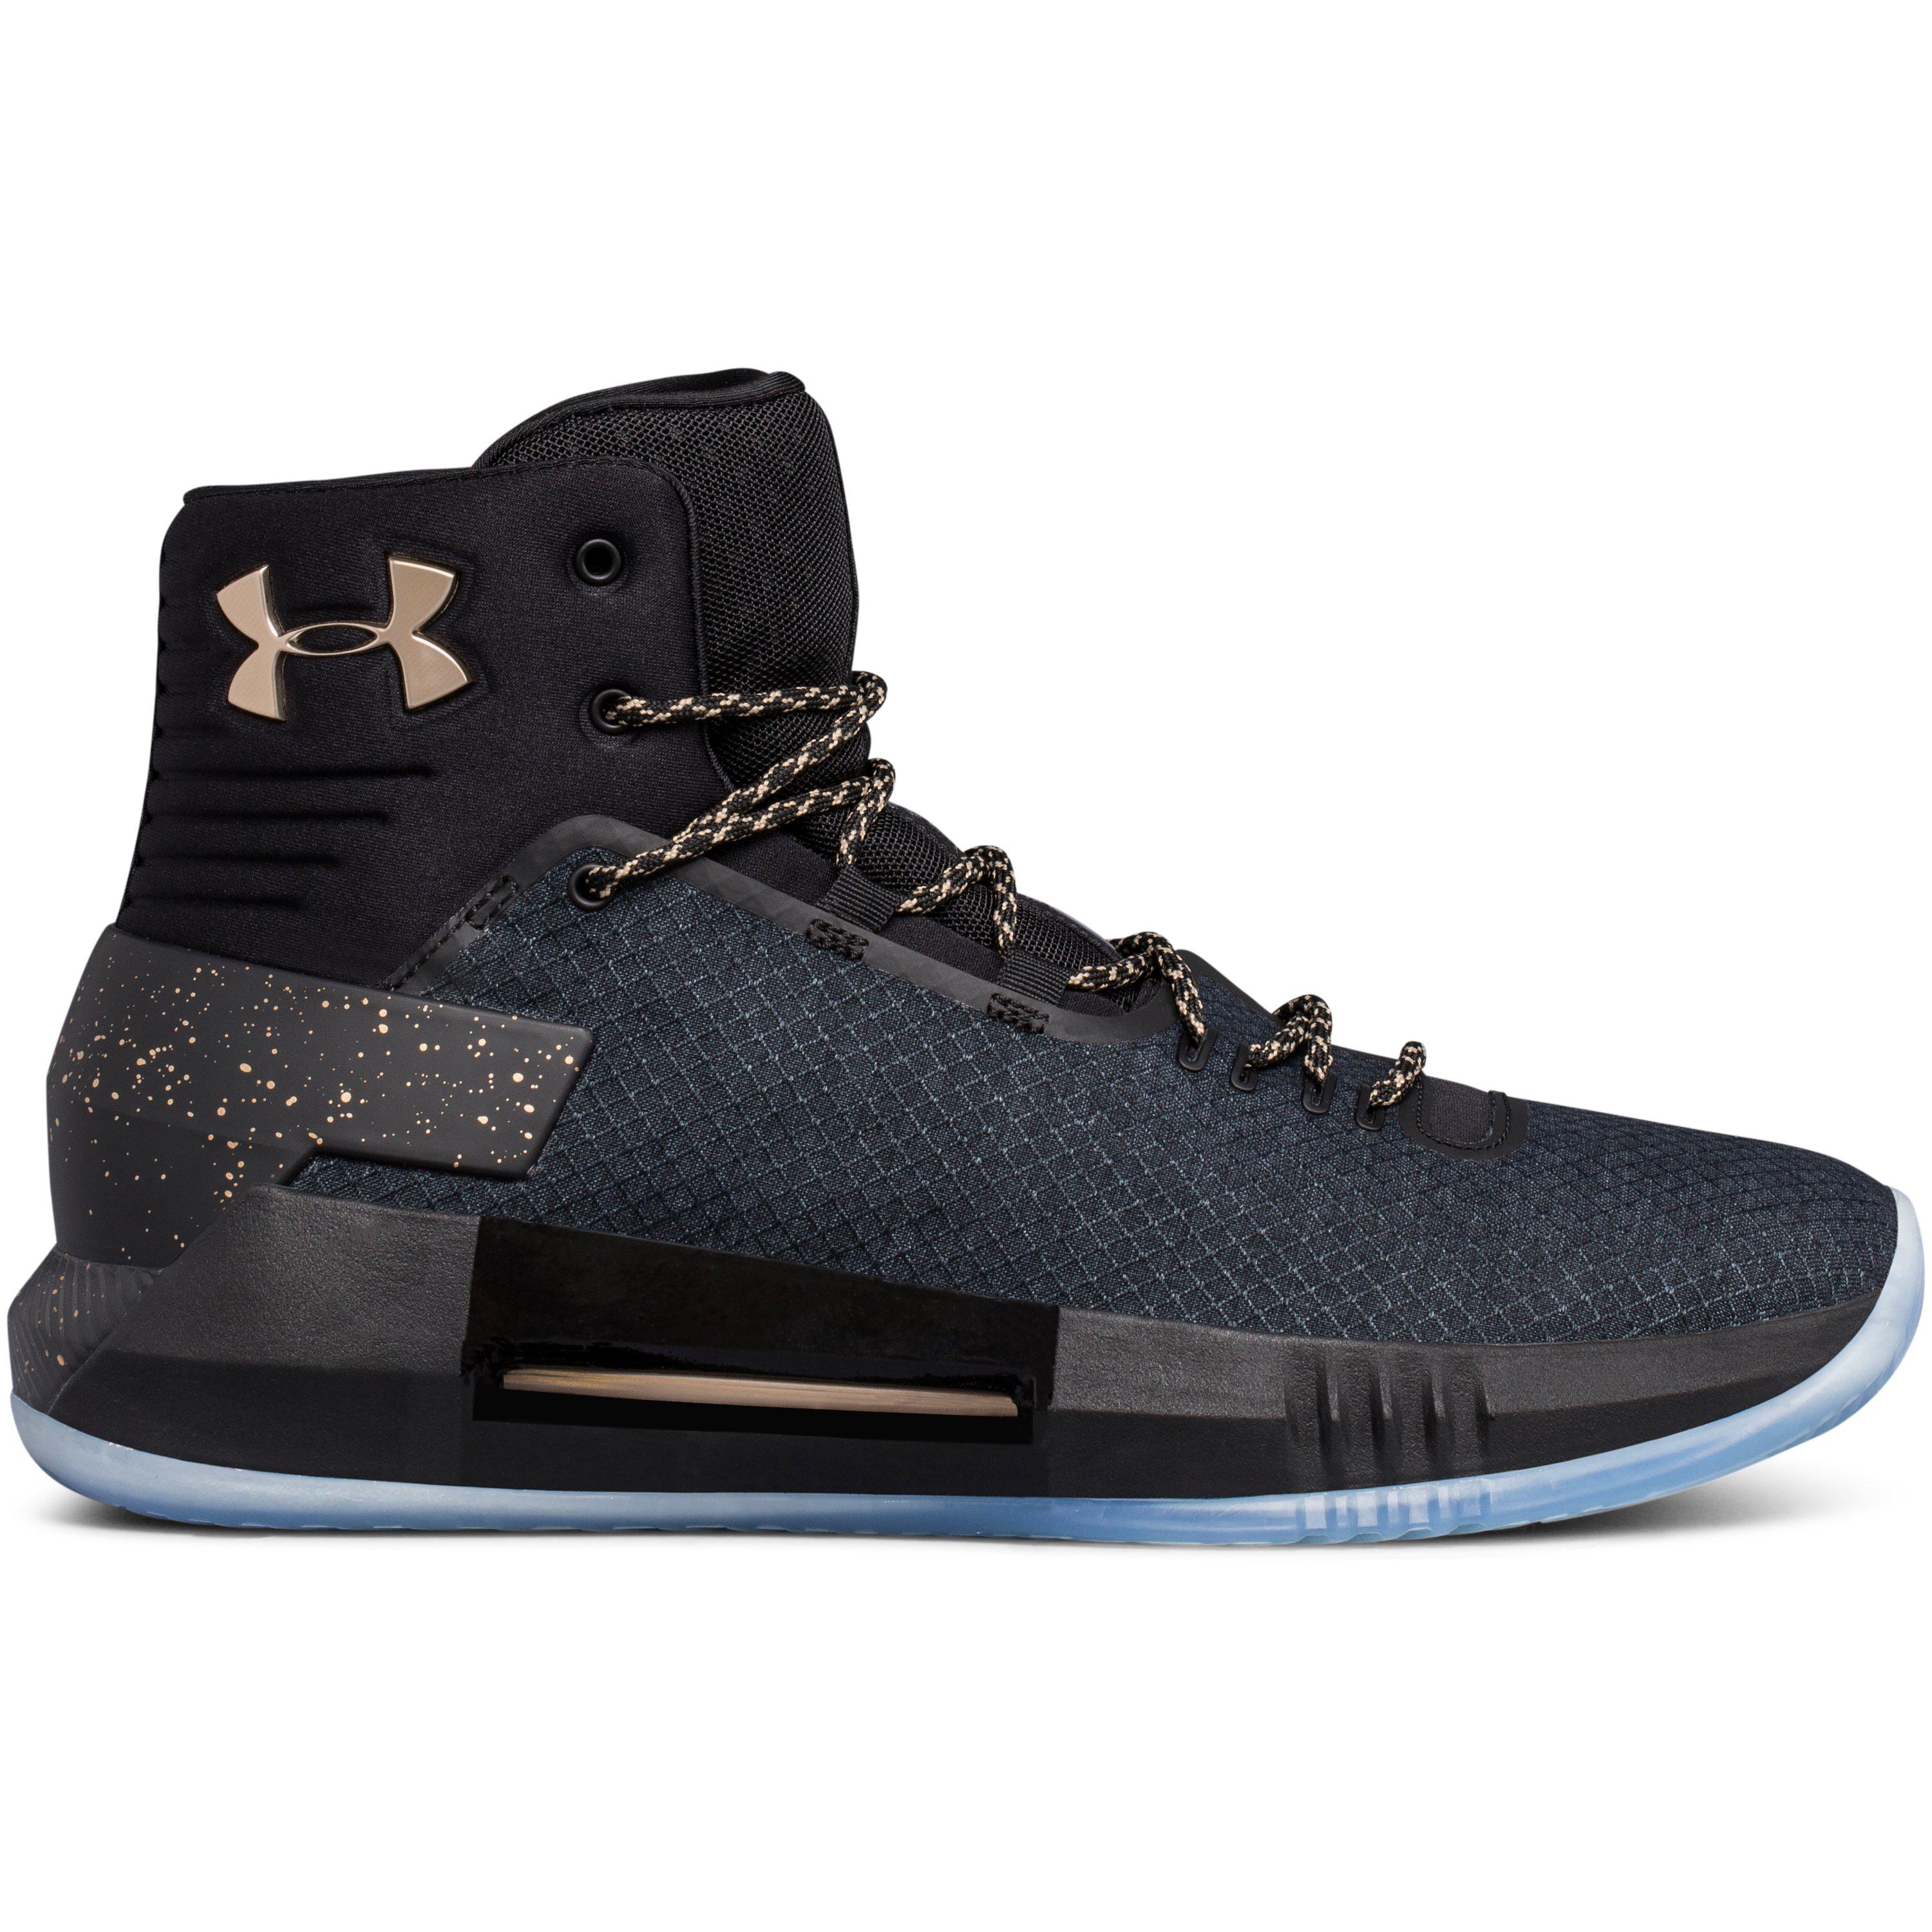 Under Armour Mens Ua Drive 4 Low Basketball Shoes 